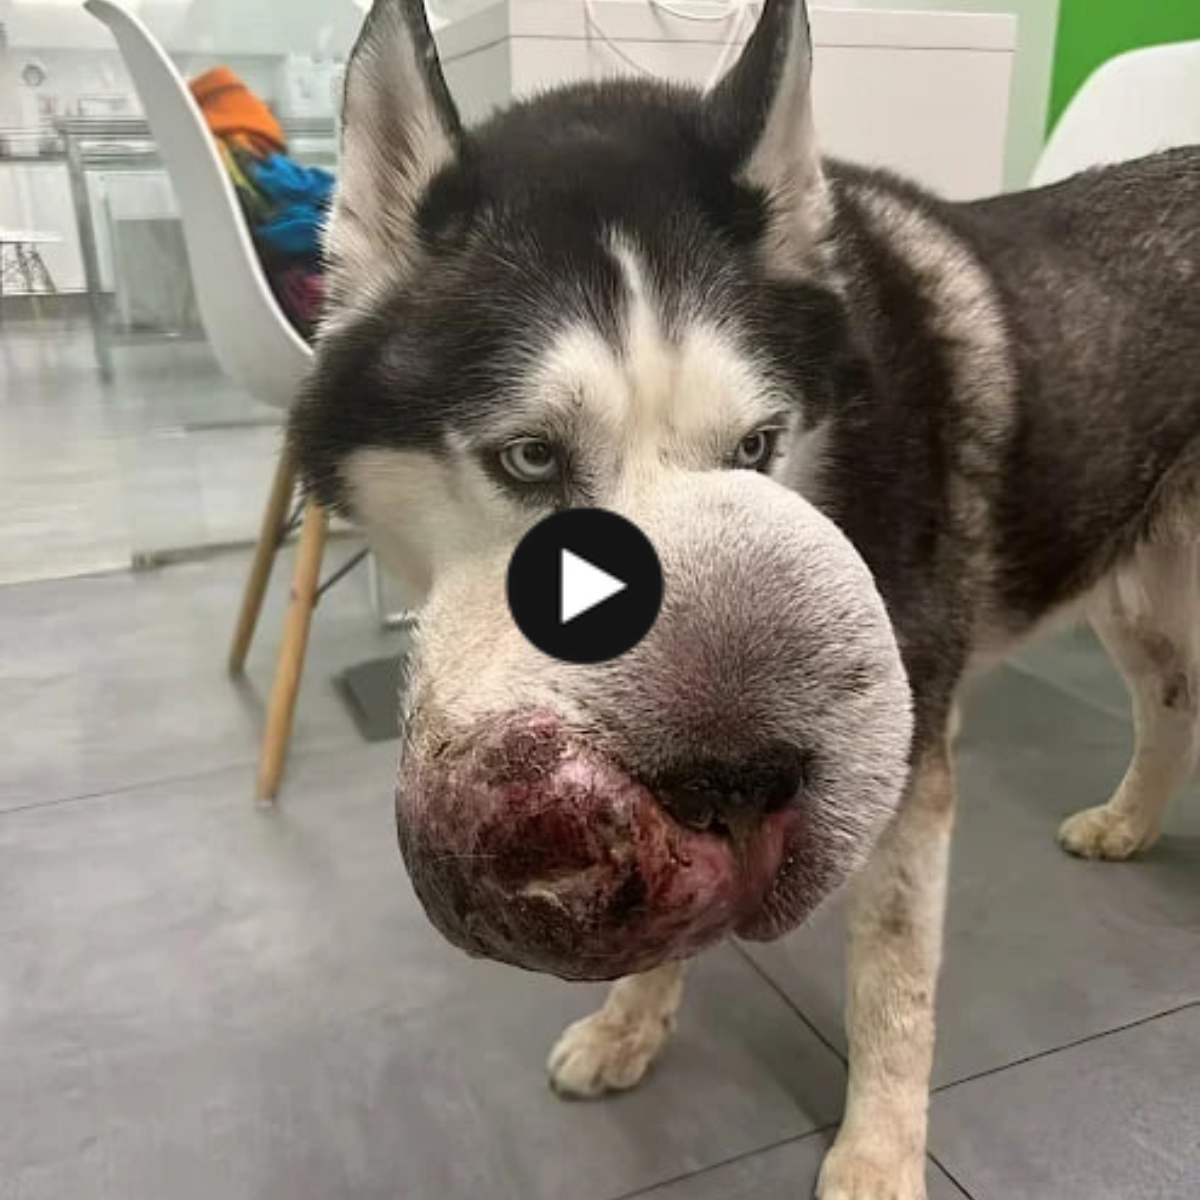 A defenseless dog fights a massive tumor, writhing in agony, falling, and yowling in excruciating pain.